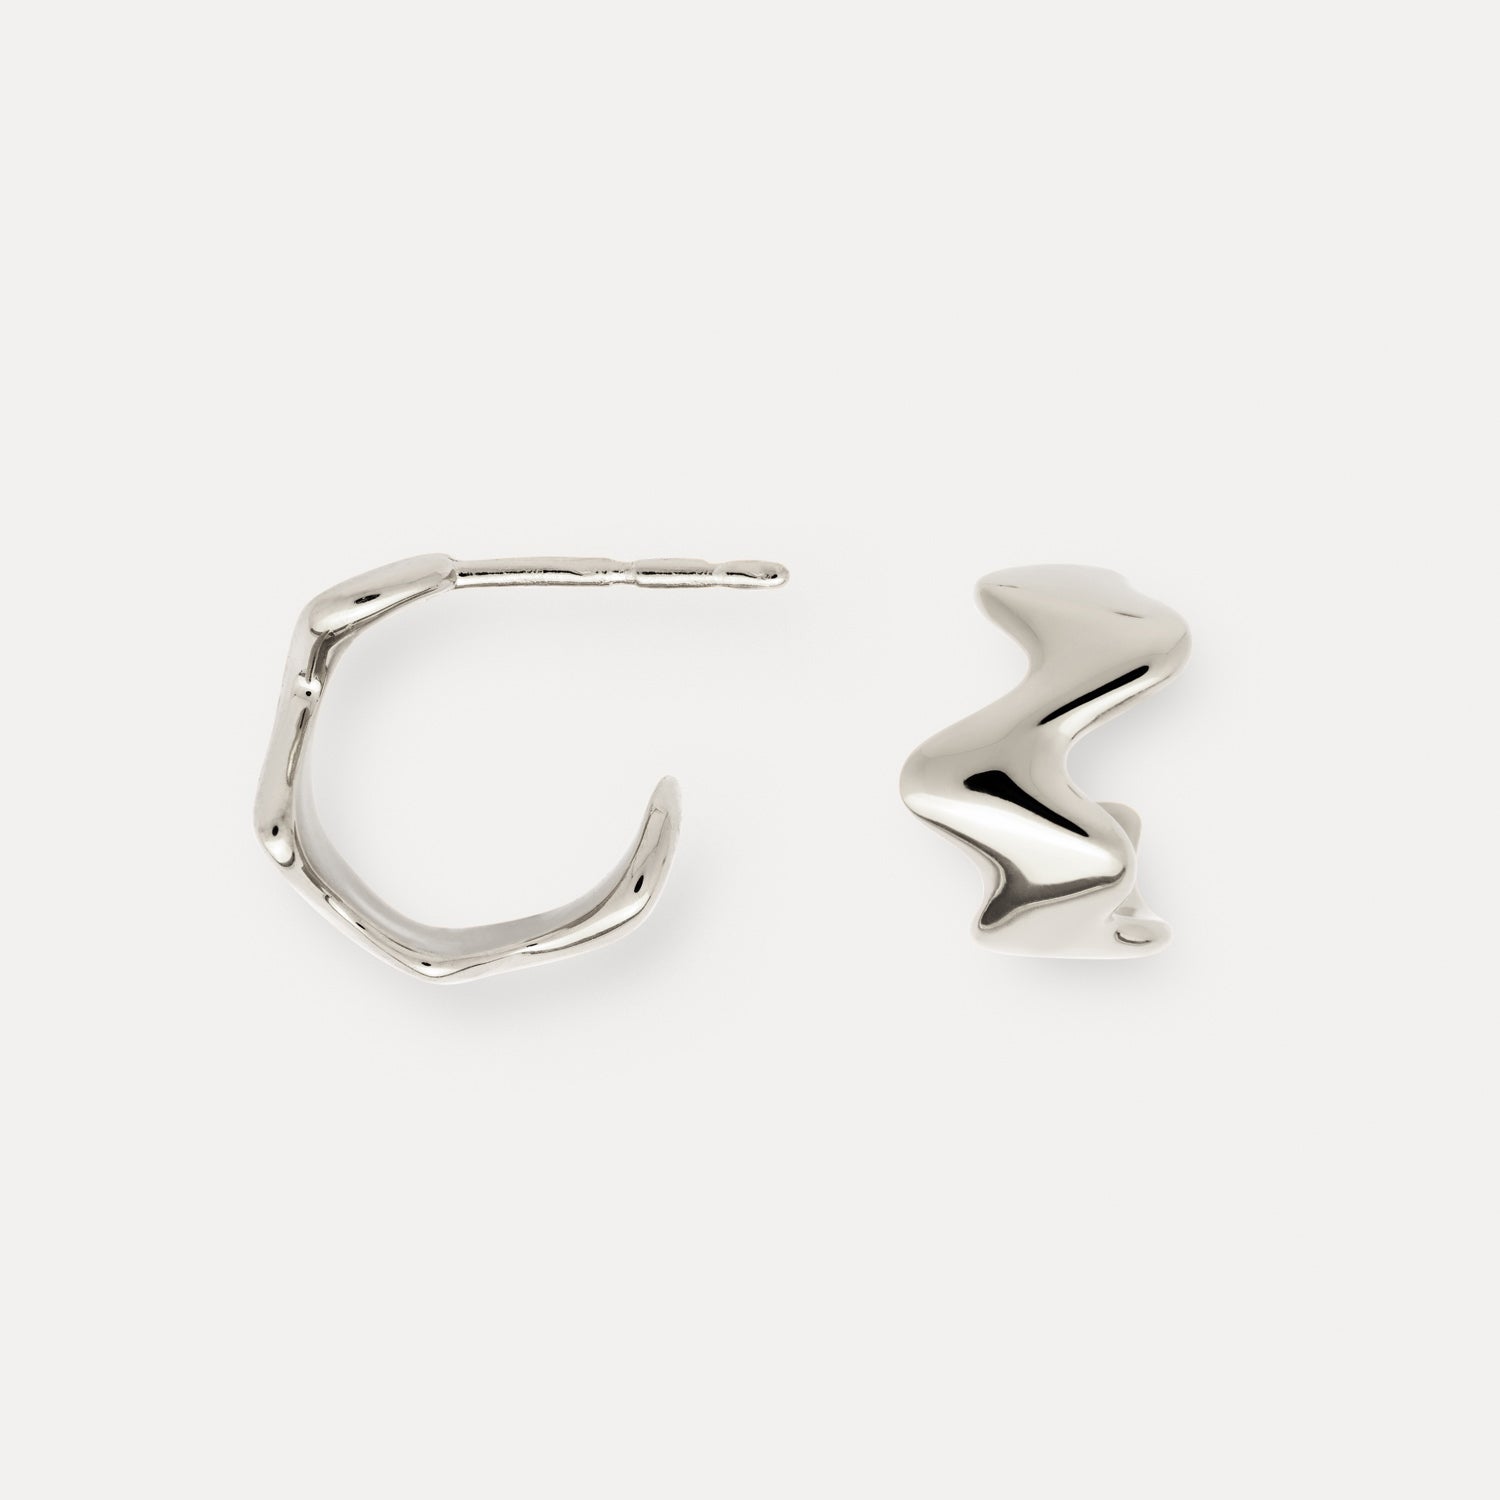 Poise Bold Hoops, recycled Sterling Silver - VEYIA Berlin. Small, wide, wavy hoops.